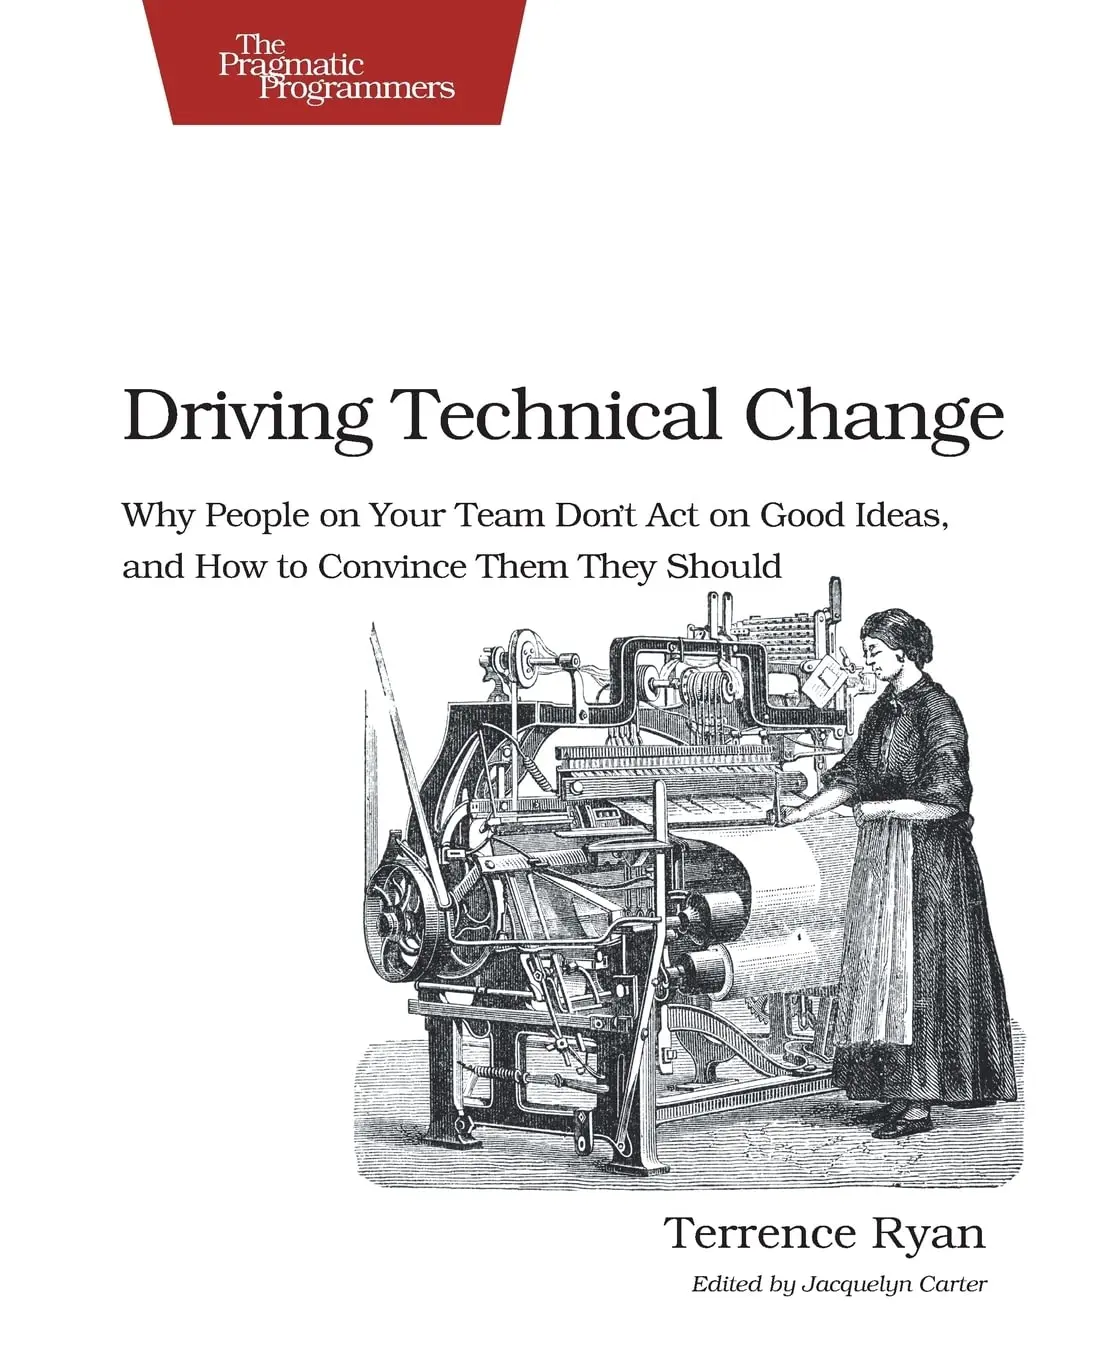 cover image for 'Driving Technical Change'